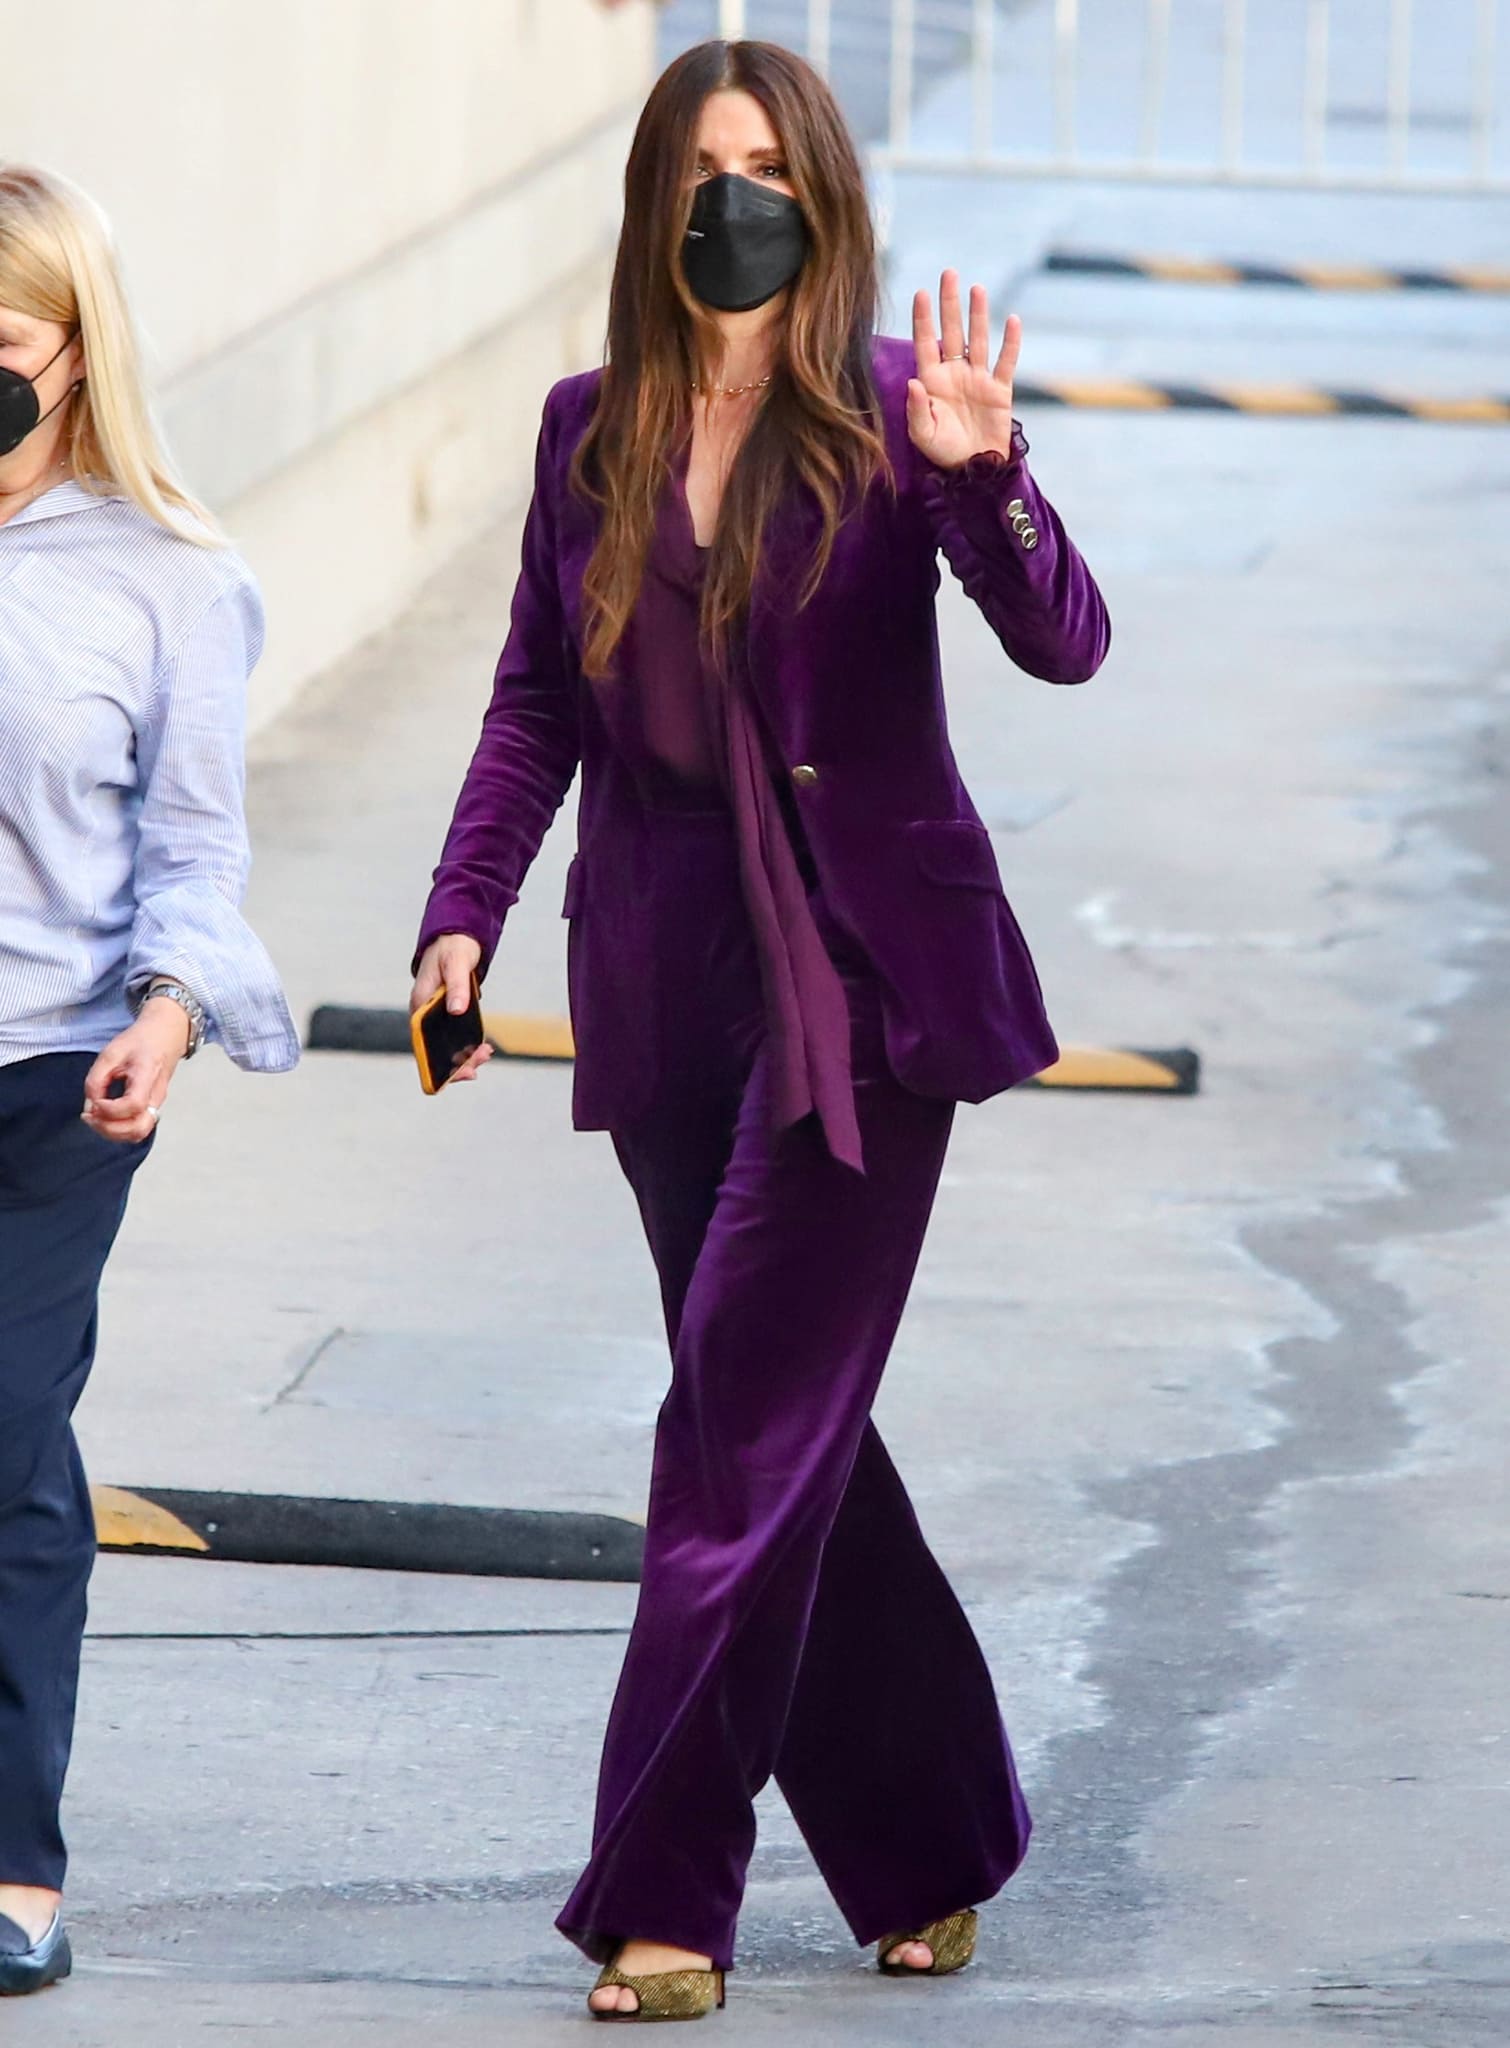 Sandra Bullock heading to Jimmy Kimmel Live in Los Angeles to promote her new drama The Unforgivable on November 22, 2021